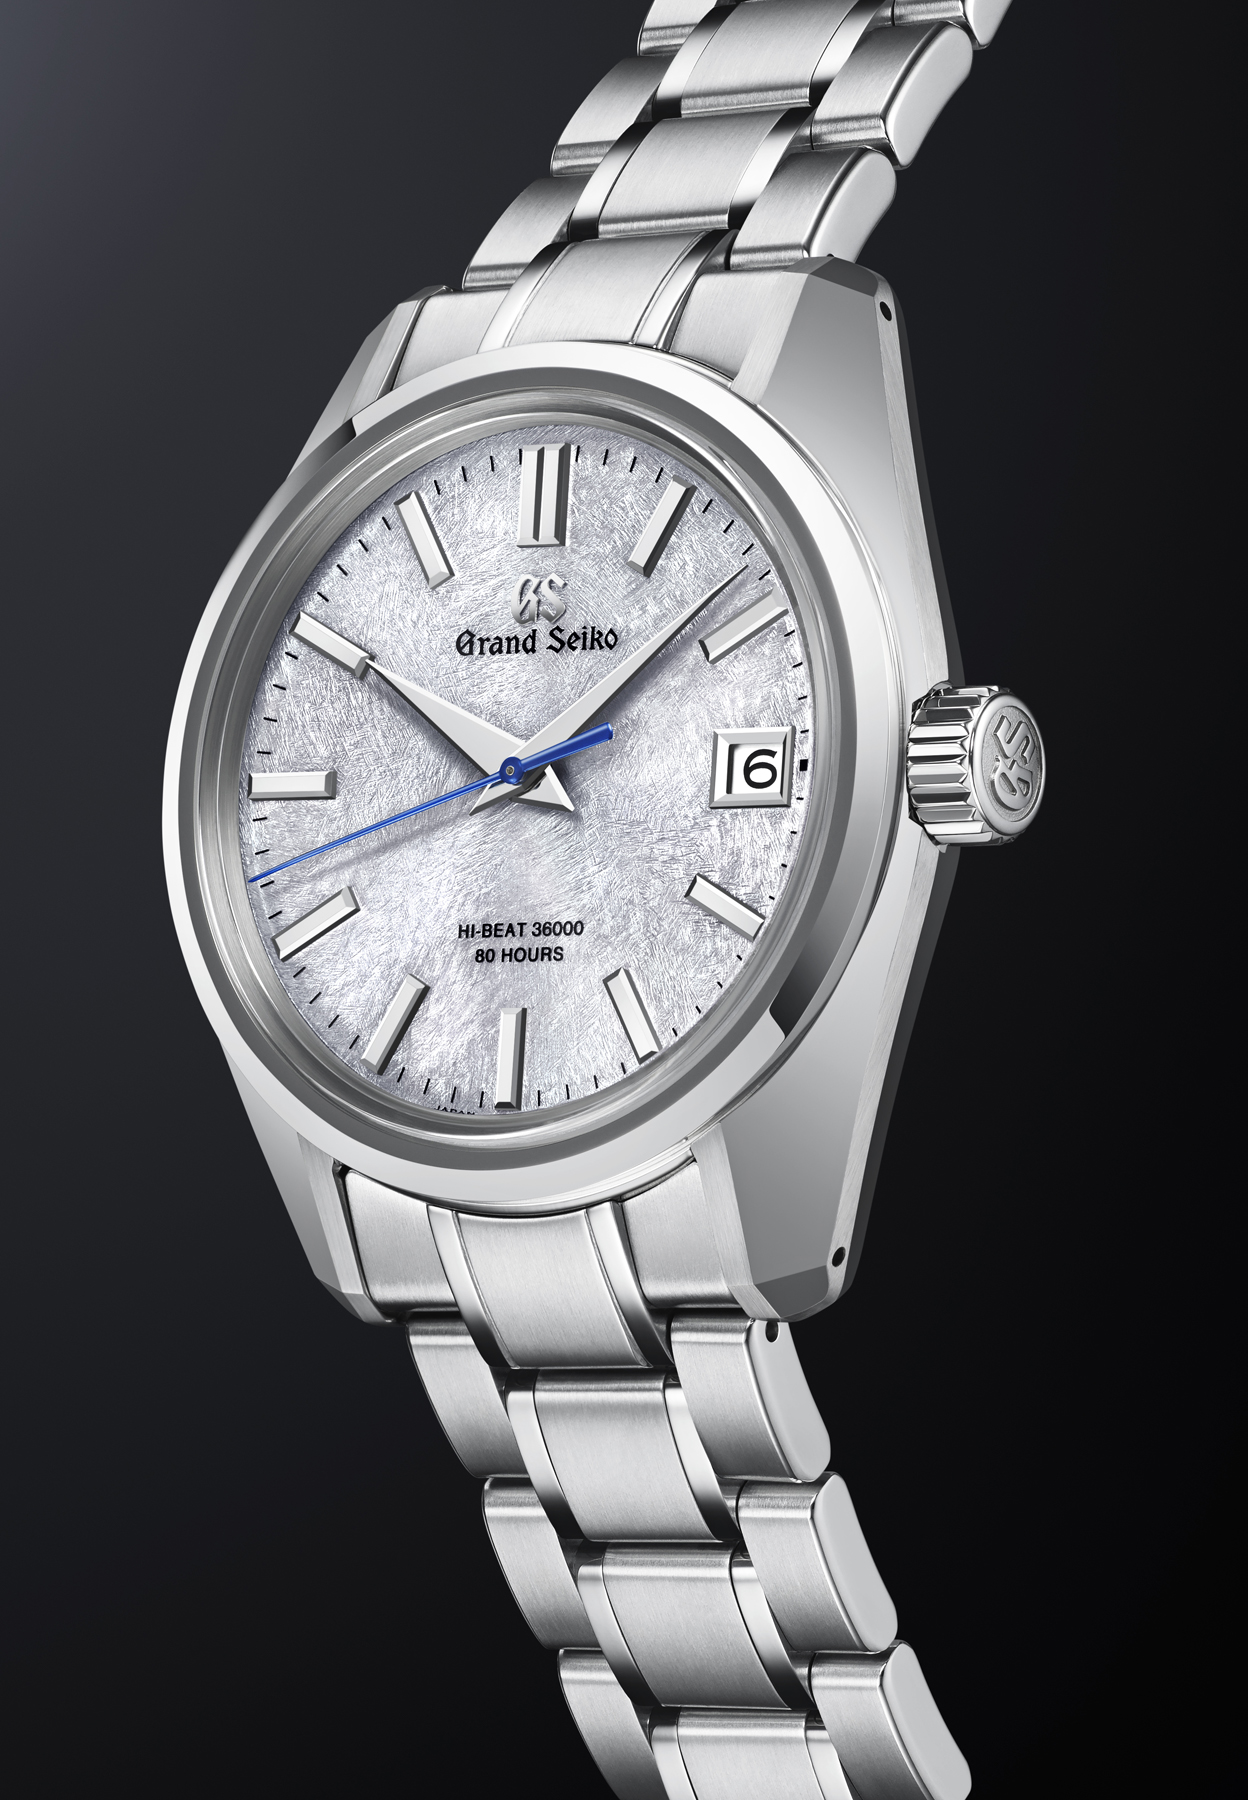 Grand Seiko creates a snowscape dial for its latest Hi-Beat 44GS watch